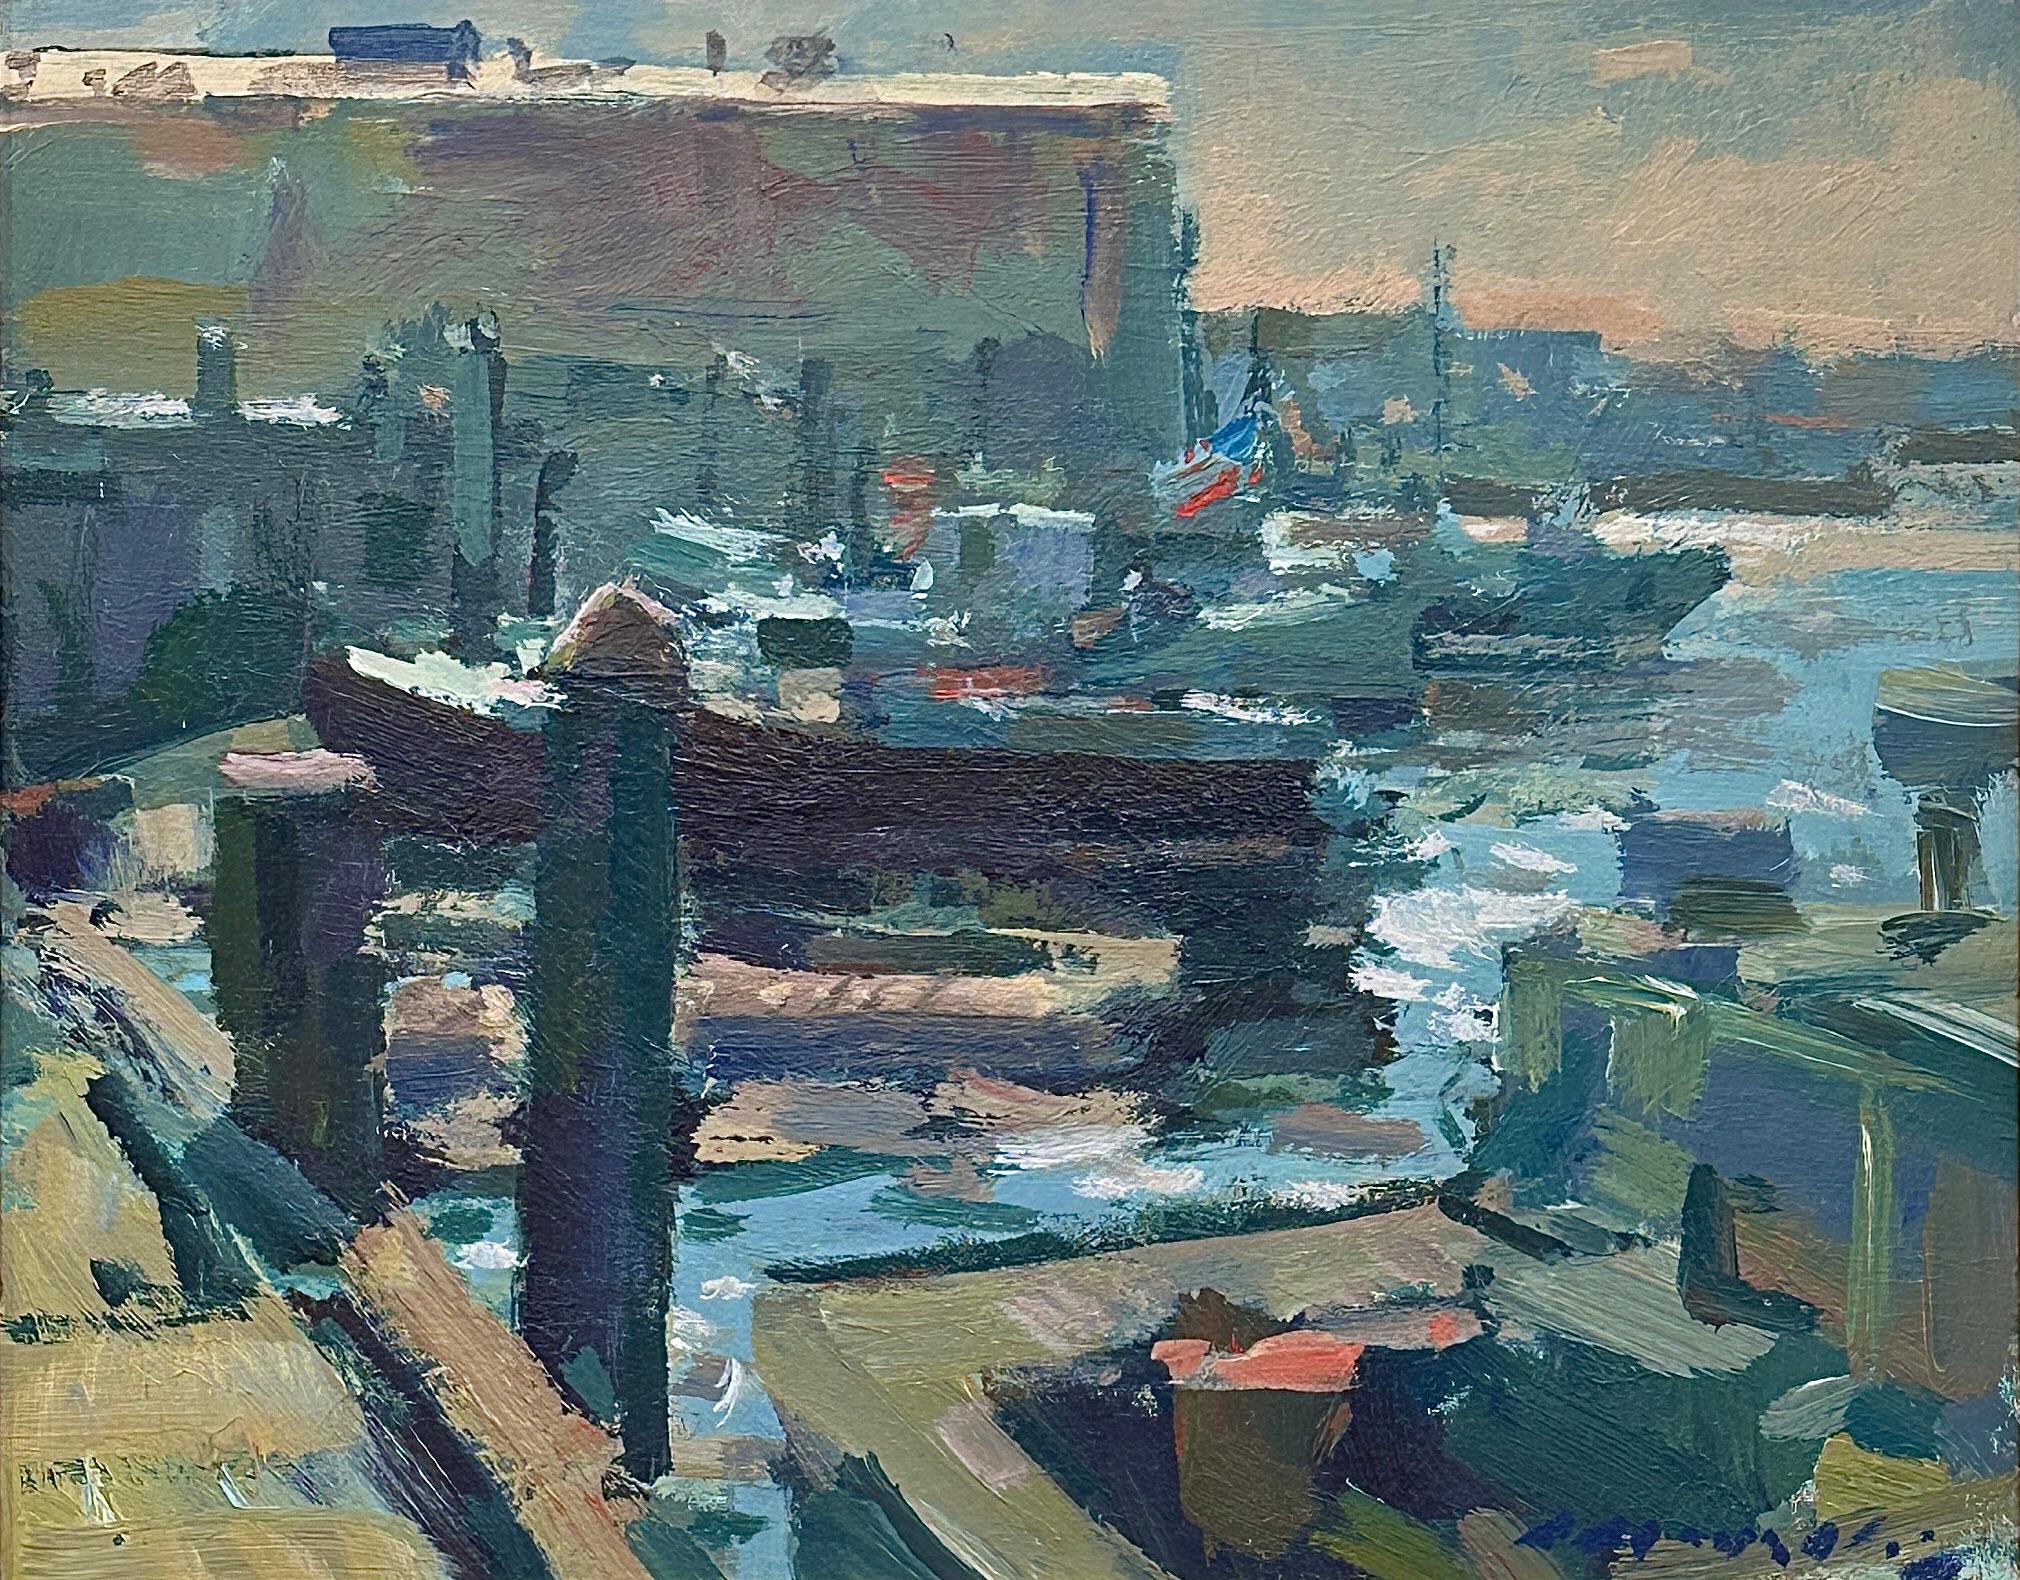 Wonderful painting of his most popular subject matter: Gloucester Harbor.  

Charles Movalli (1945–2016) had a BA from Clark University and a PhD from the University of Connecticut. He painted and wrote about art for over thirty years. He belonged